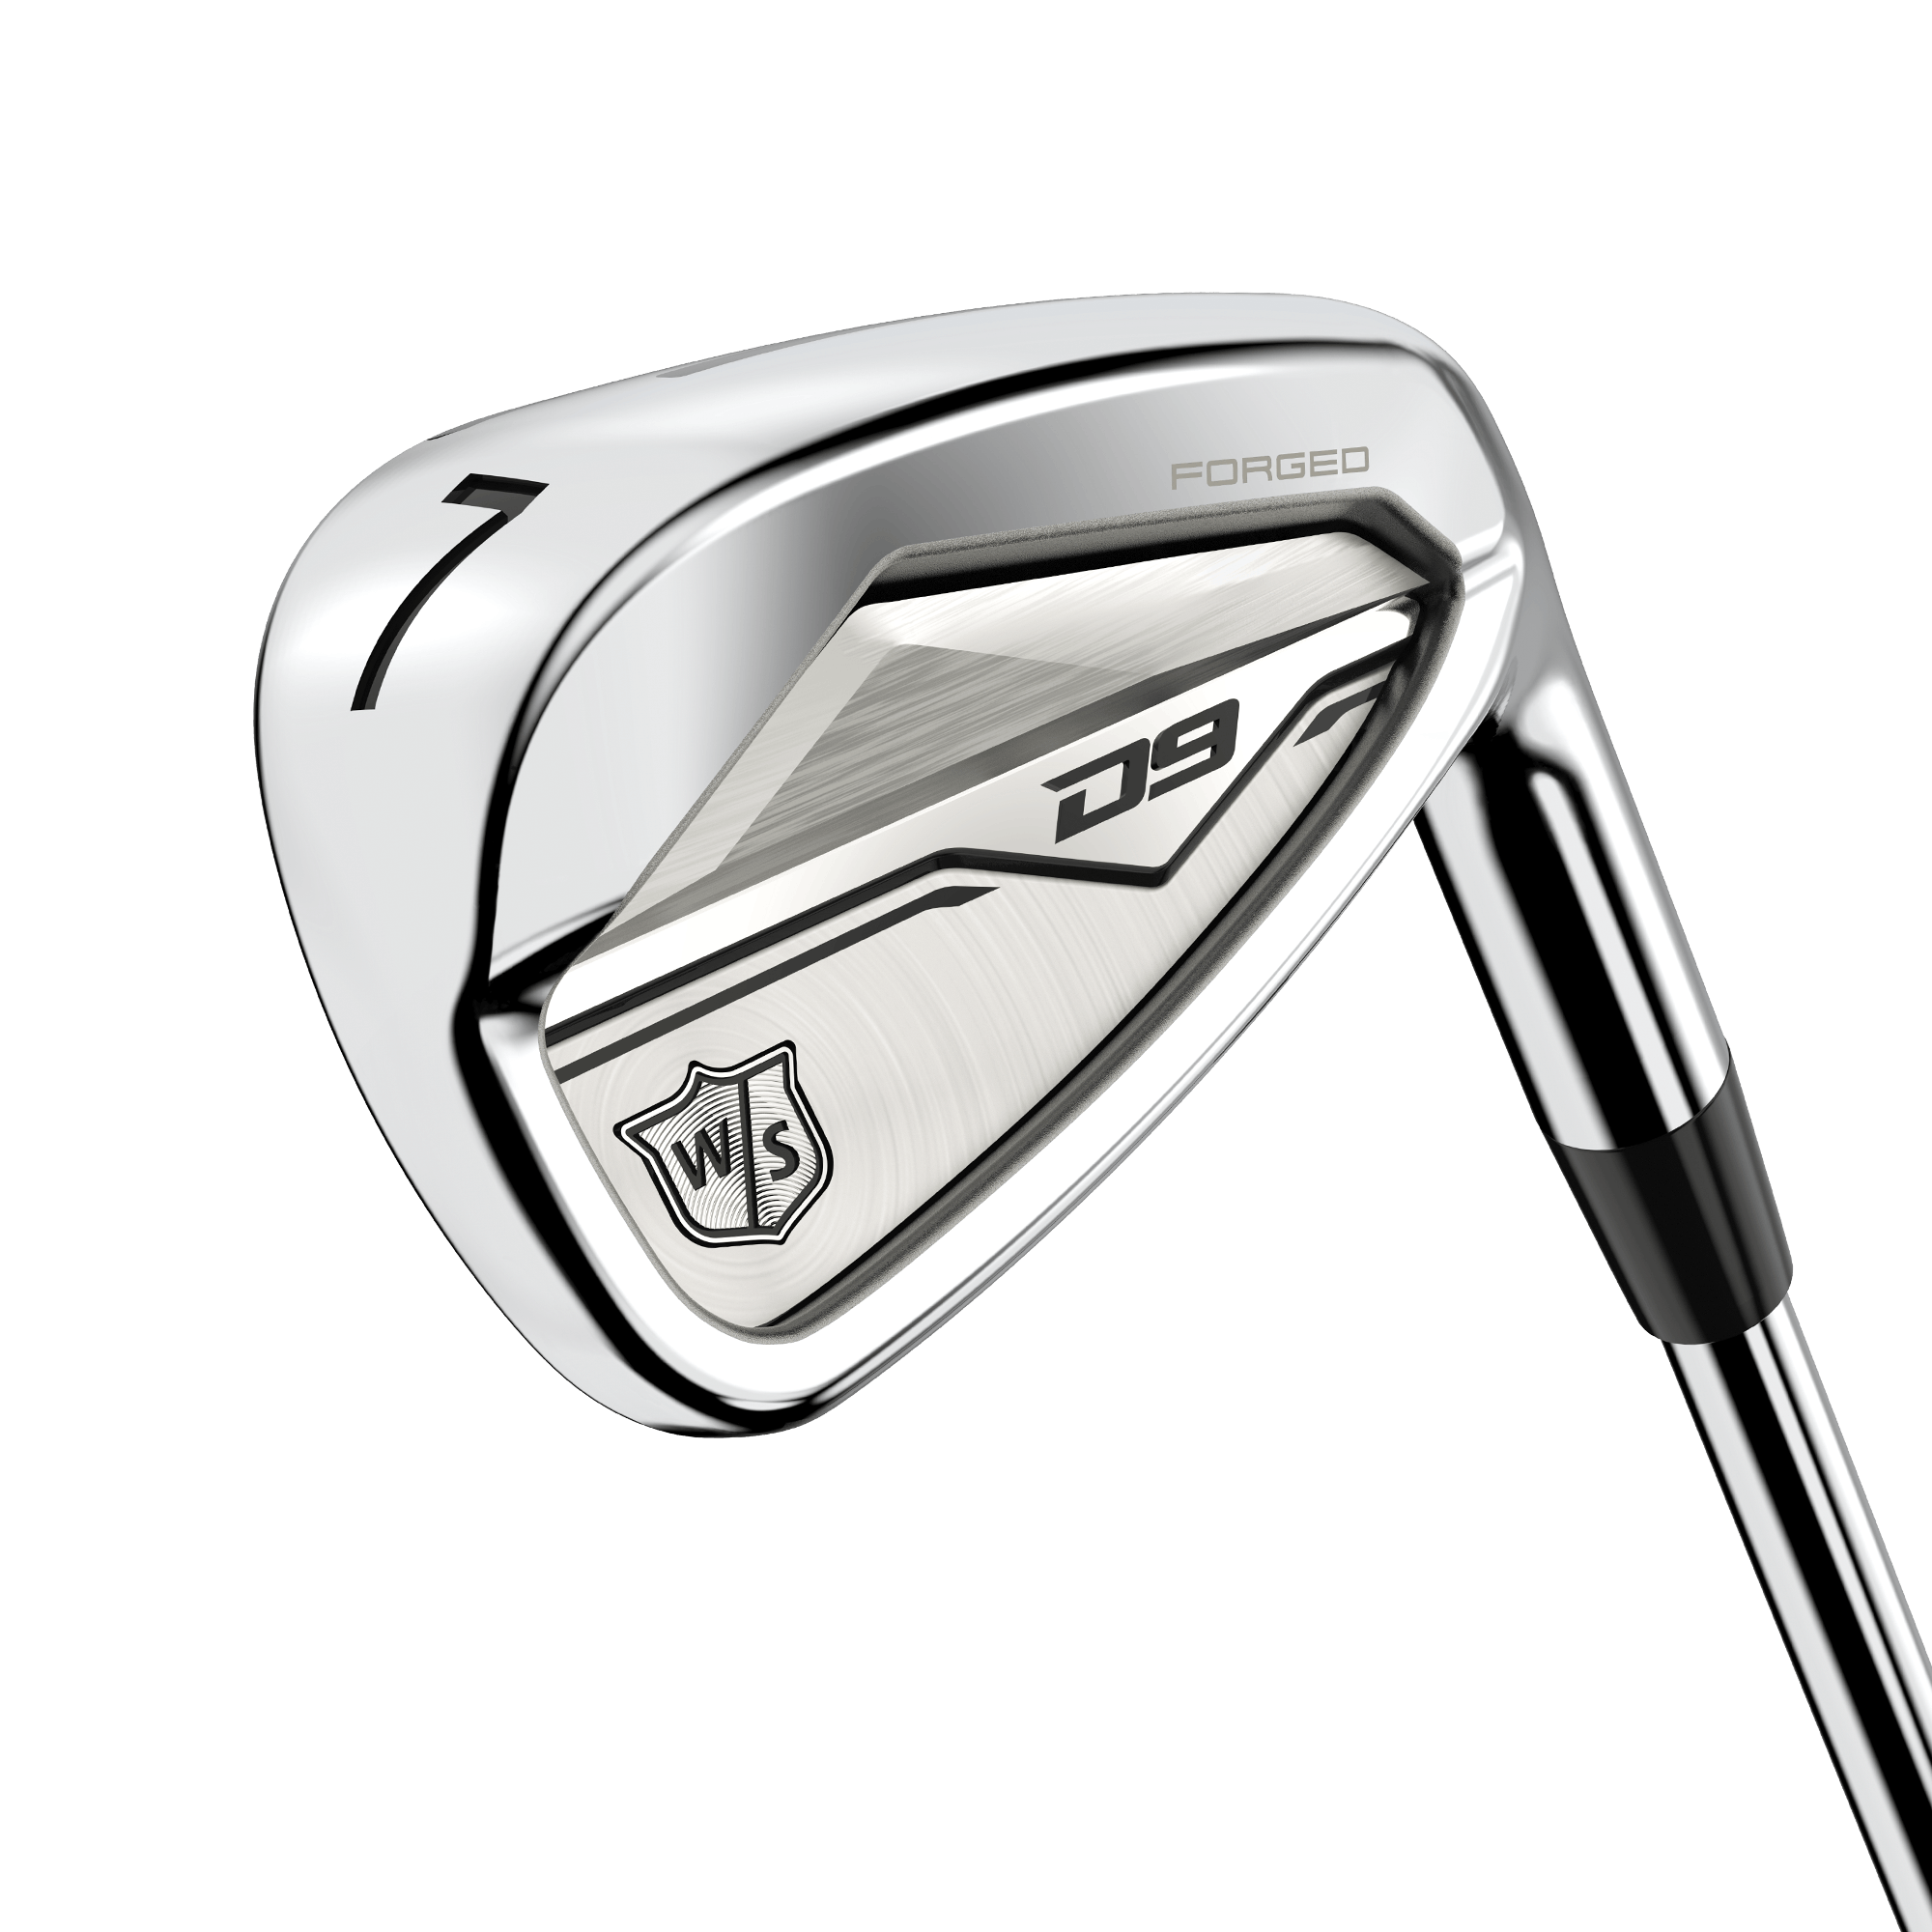 Wilson D9 Forged Iron Set · Right handed · Graphite · Regular · 5-PW,GW